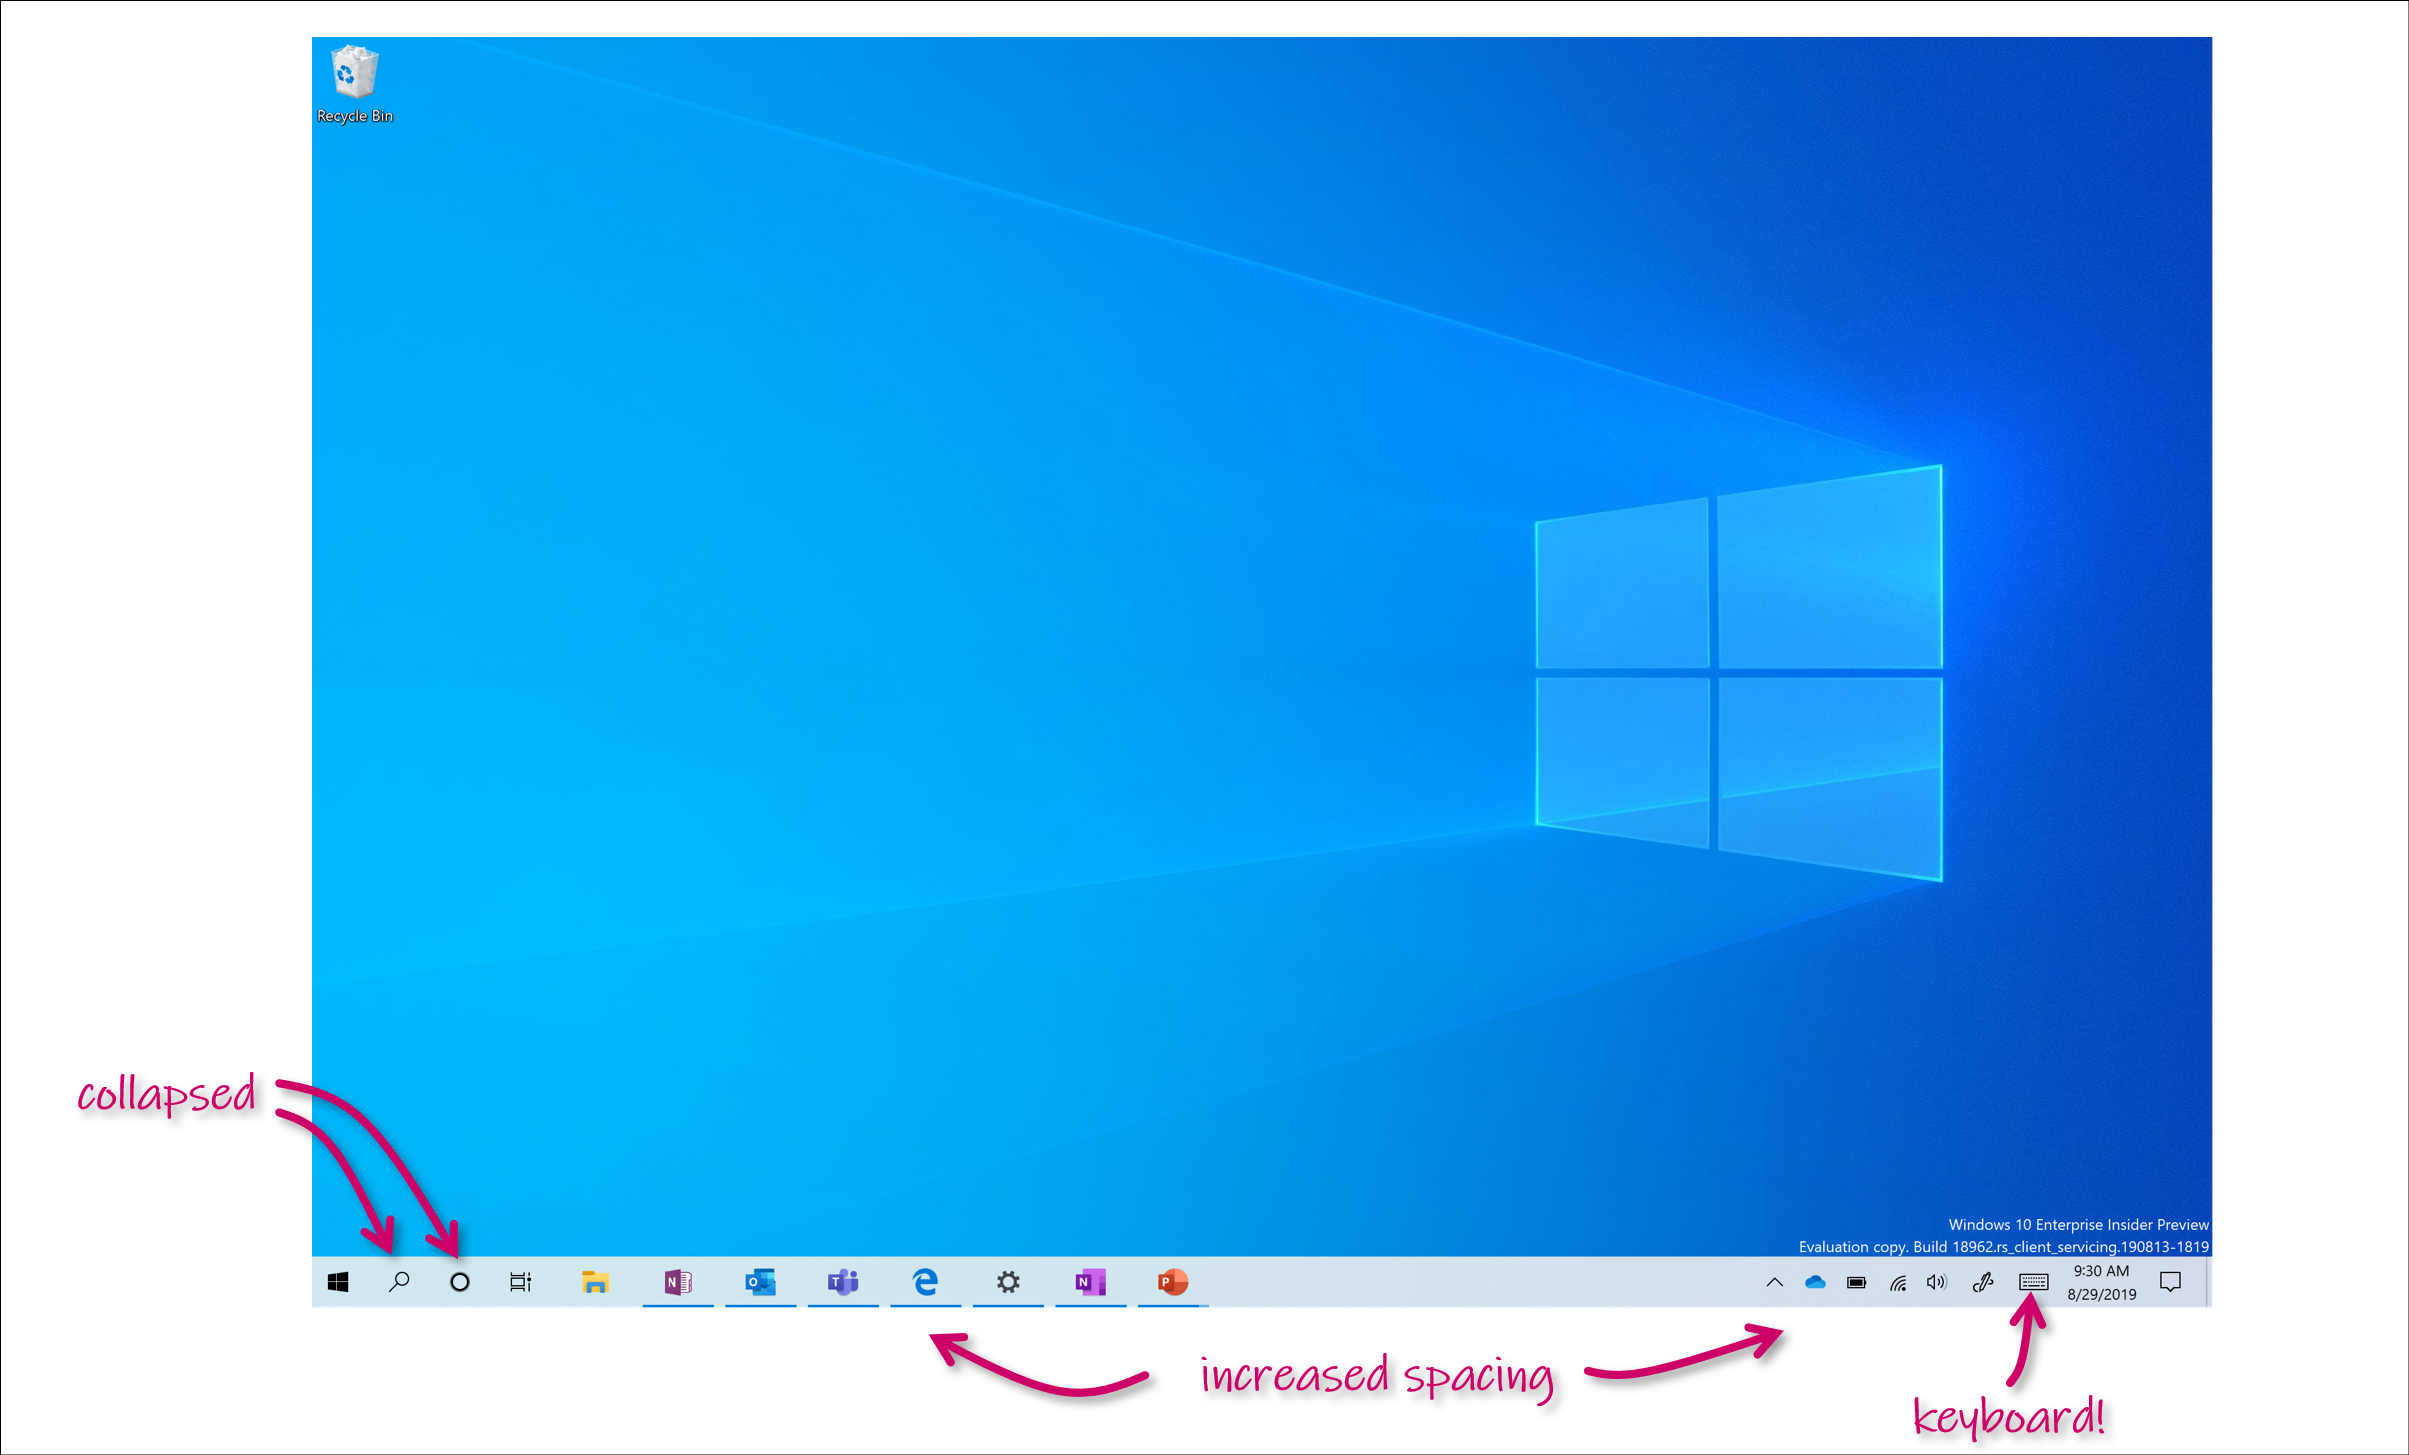 Showing the increased spacing on the taskbar, plus collapsed search box and keyboard icon.